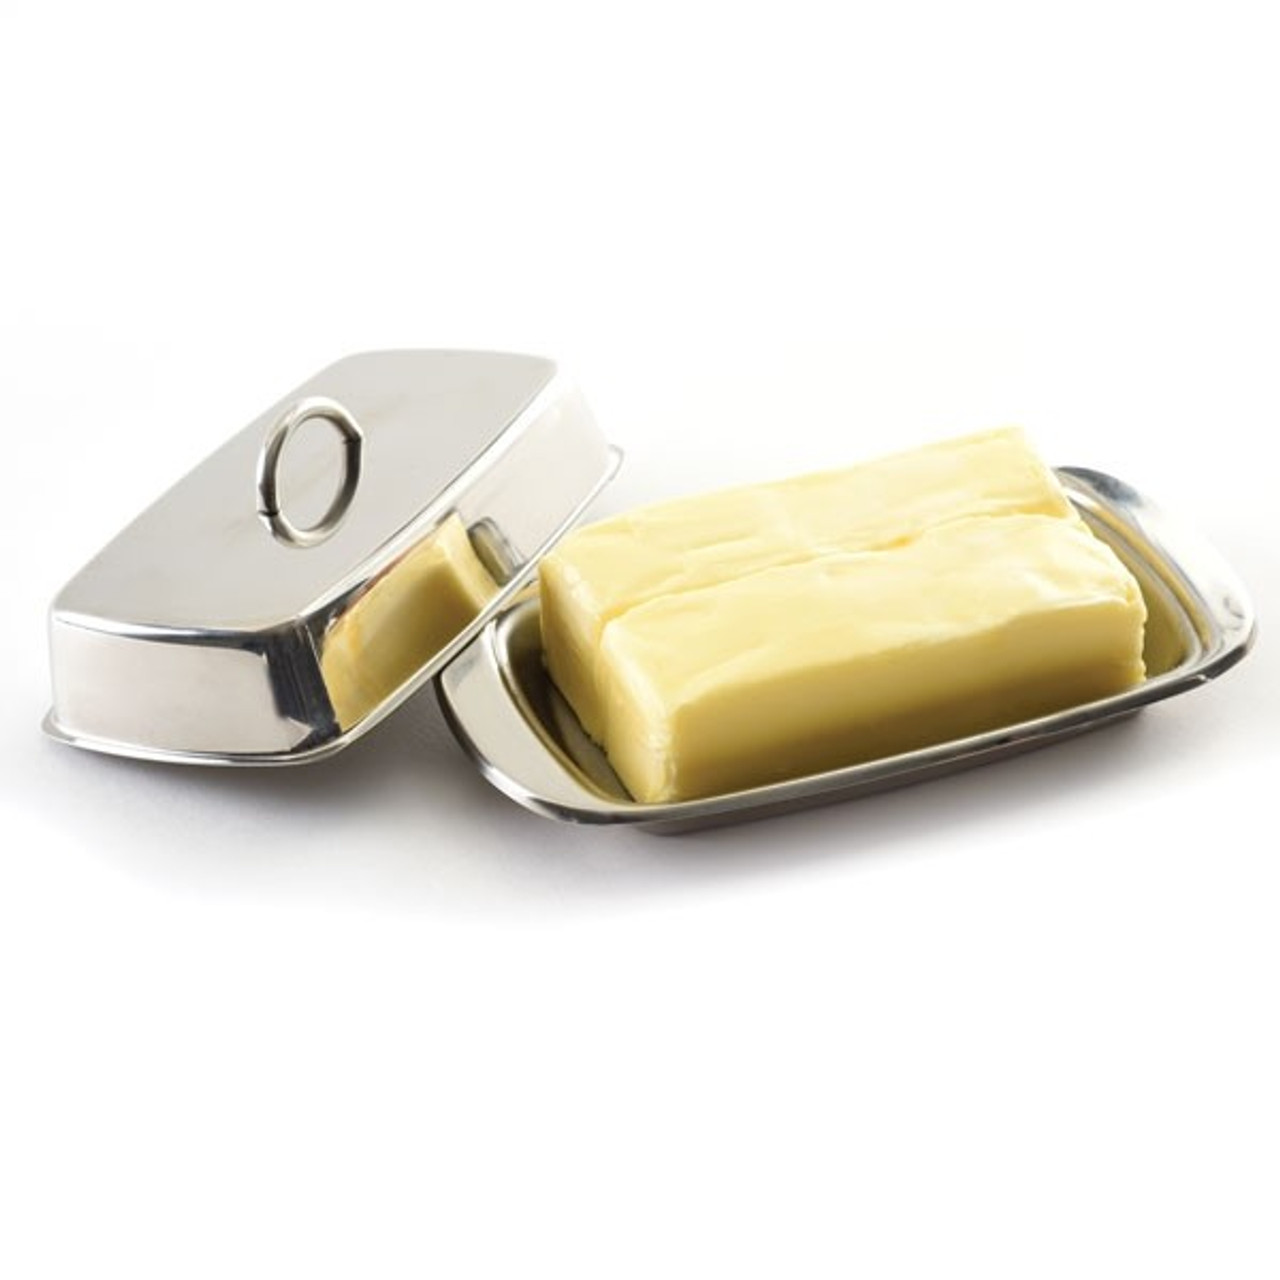 Stainless steel butter dish